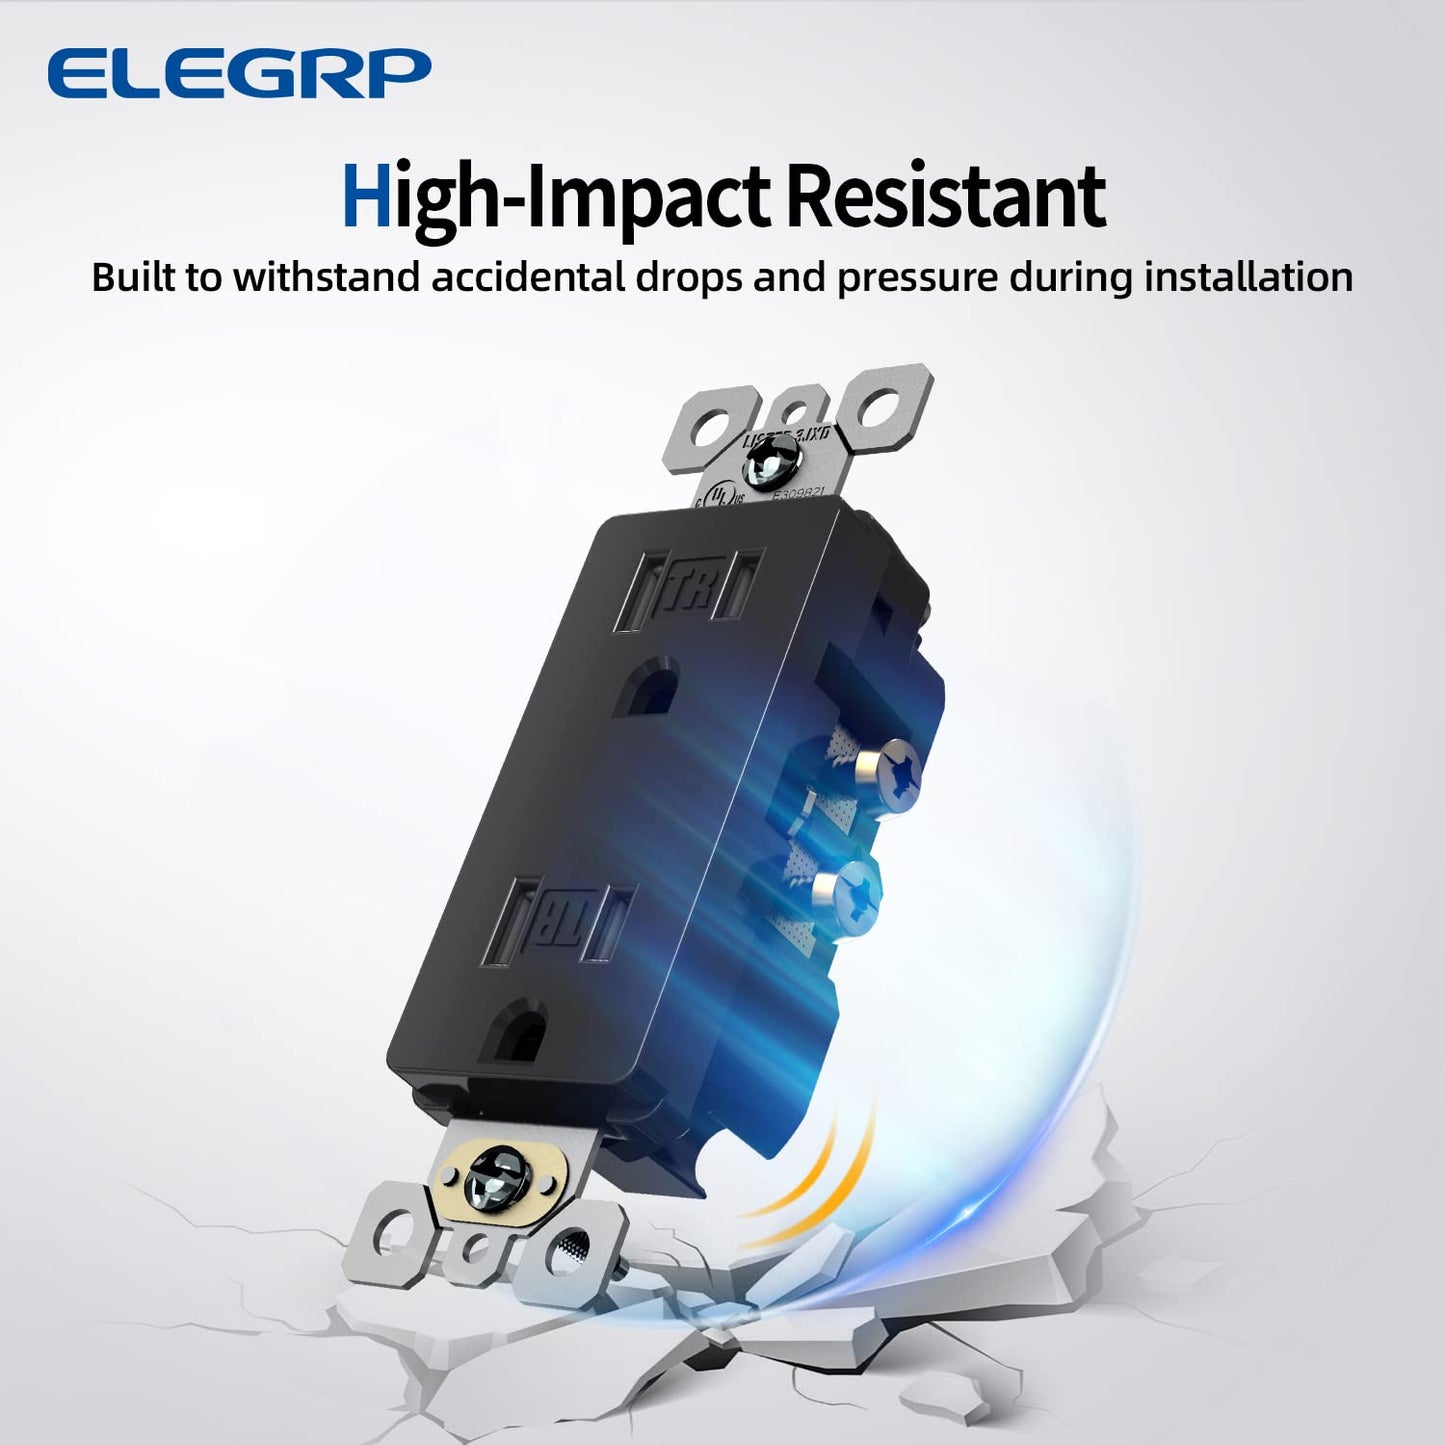 ELEGRP Decorator Wall Receptacle Outlet, Tamper Resistant 15 Amp Standard Electrical Wall Outlet, Self-grounding, 125V, 2 Pole 3 Wire, 5-15R,（10 Pack）